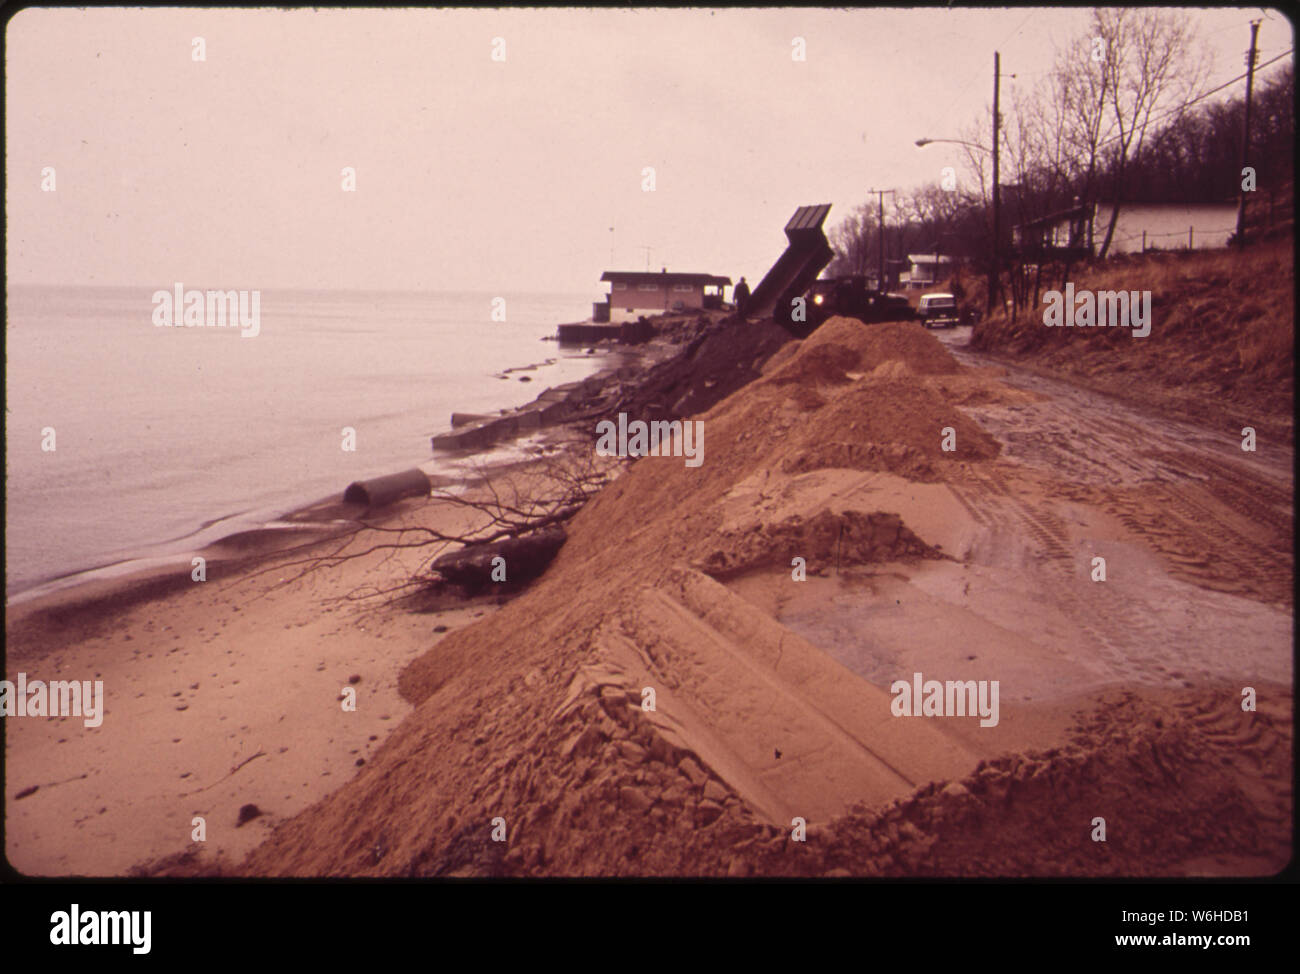 HOUSE IN BACKGROUND IS THREATENED BY BEACH EROSION. U.S ARMY CORPS OF ENGINEERS PROVIDED DIRT BULWARK IN FOREGROUND Stock Photo